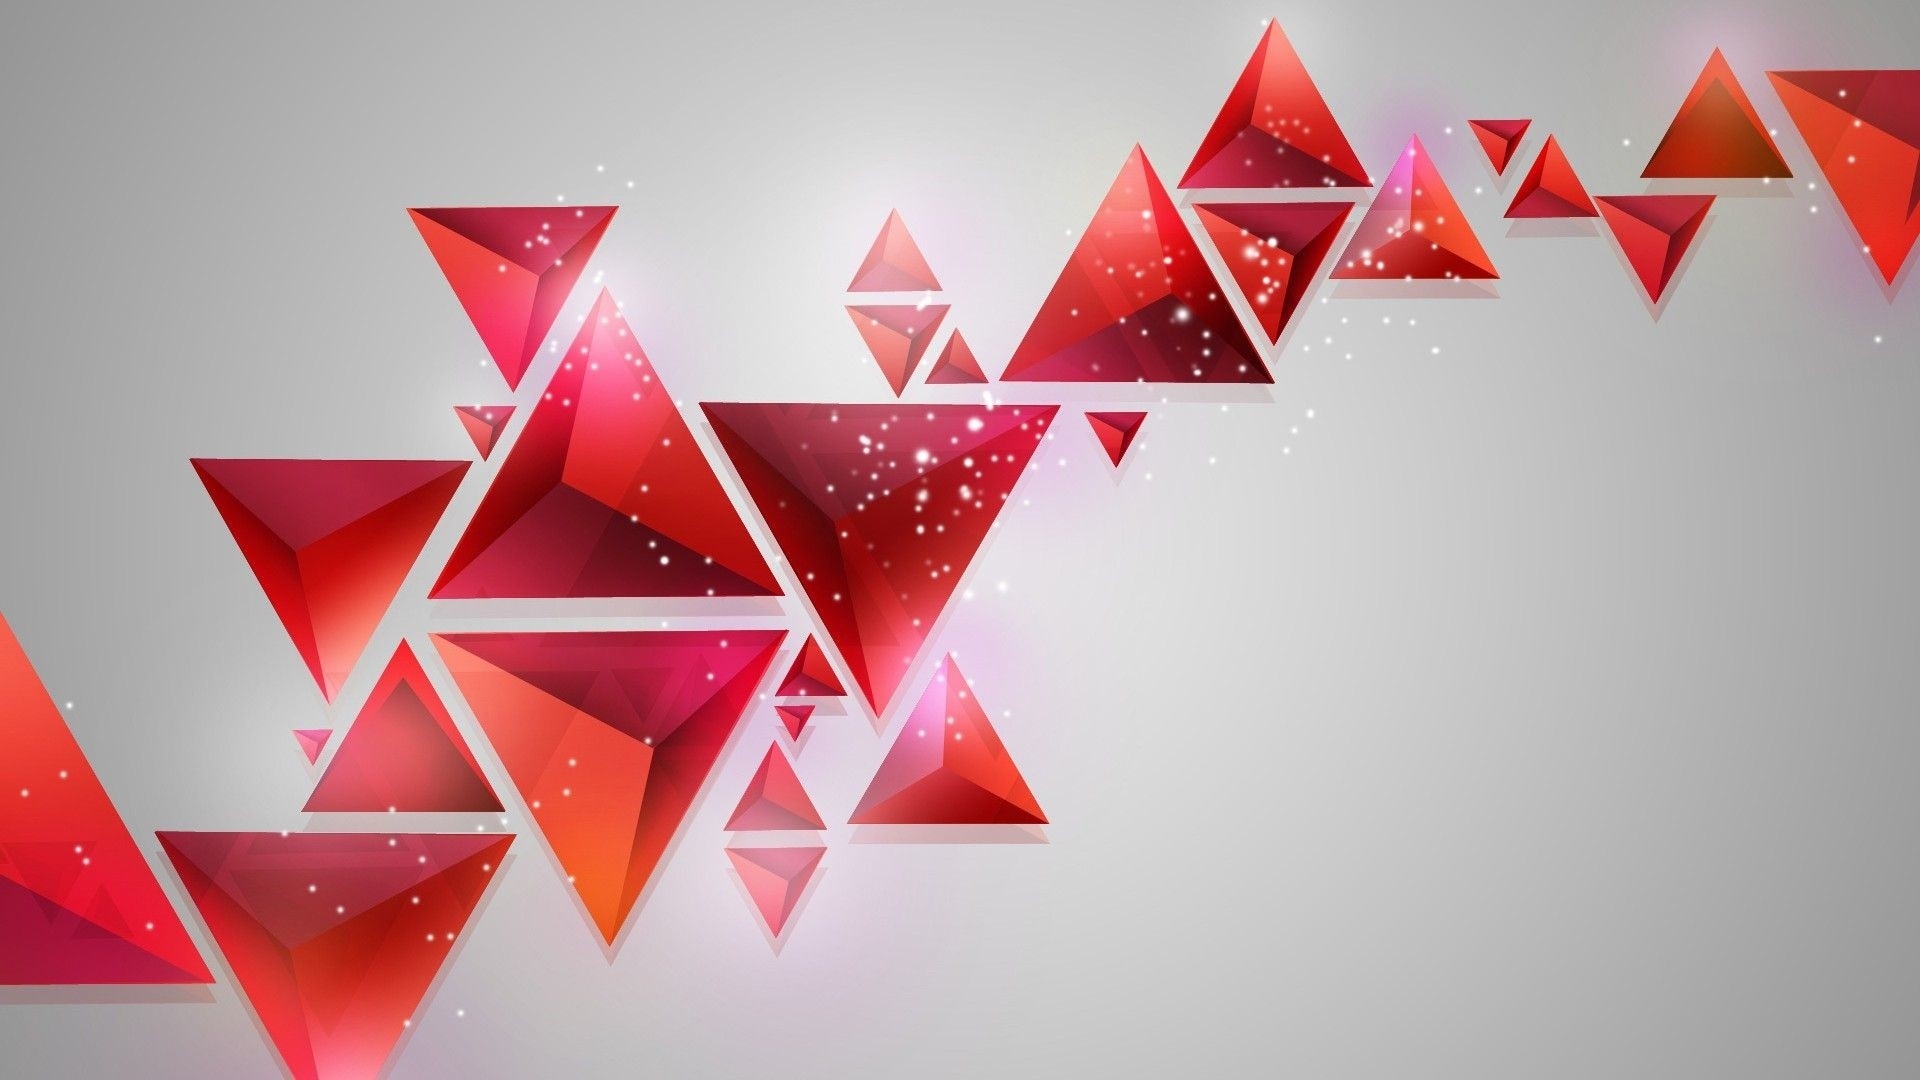 Shapes Triangle wallpaper for pc